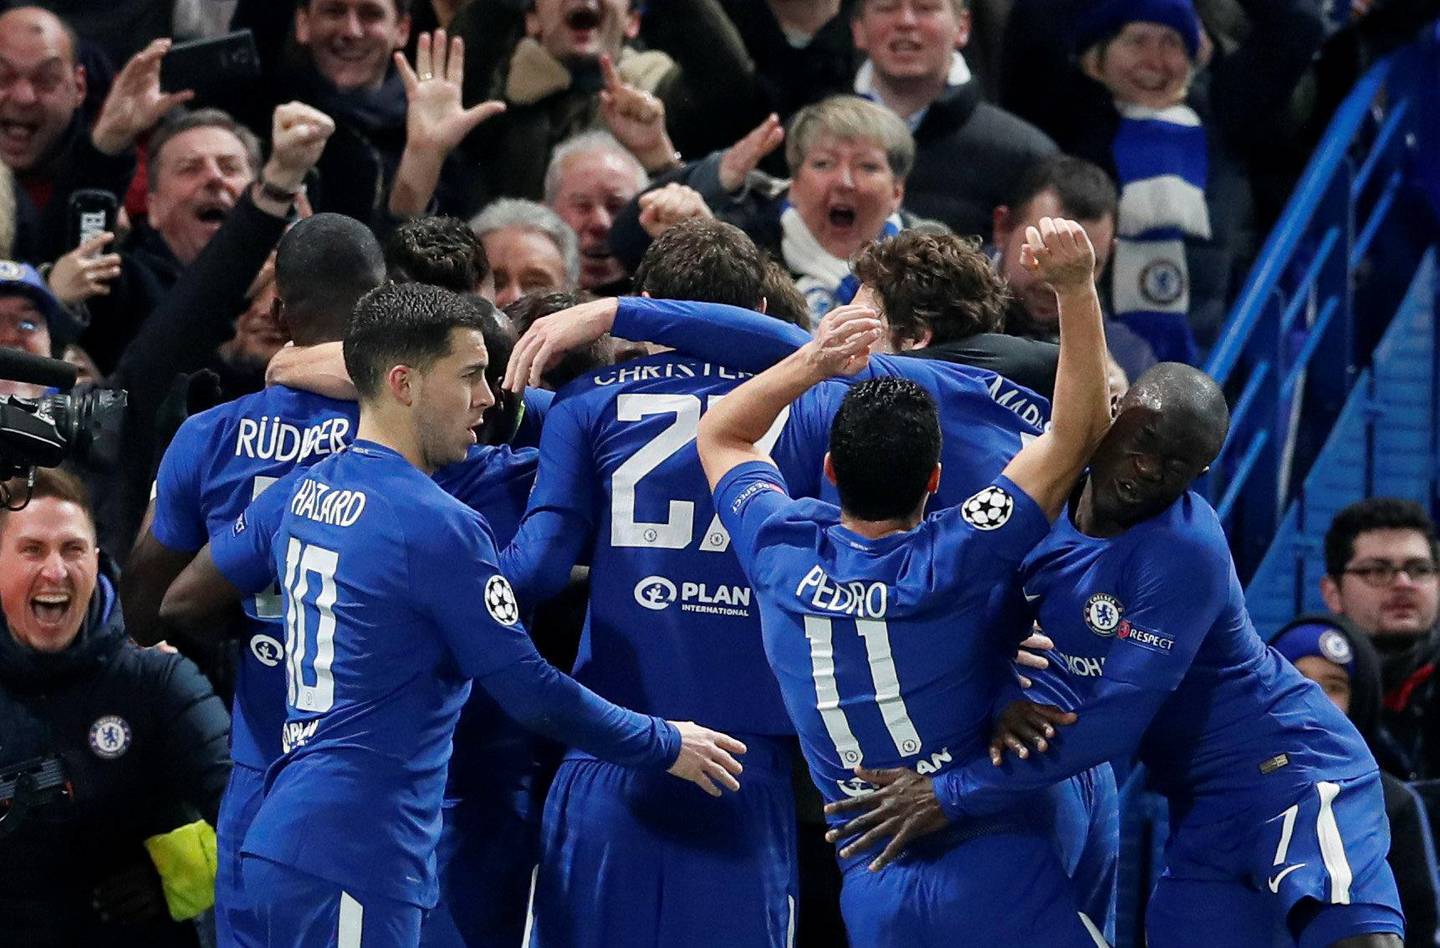 Soccer Football - Champions League Round of 16 First Leg - Chelsea vs FC Barcelona - Stamford Bridge, London, Britain - February 20, 2018   Chelsea's Willian celebrates scoring their first goal with teammates as Pedro collides with N'Golo Kante    REUTERS/David Klein